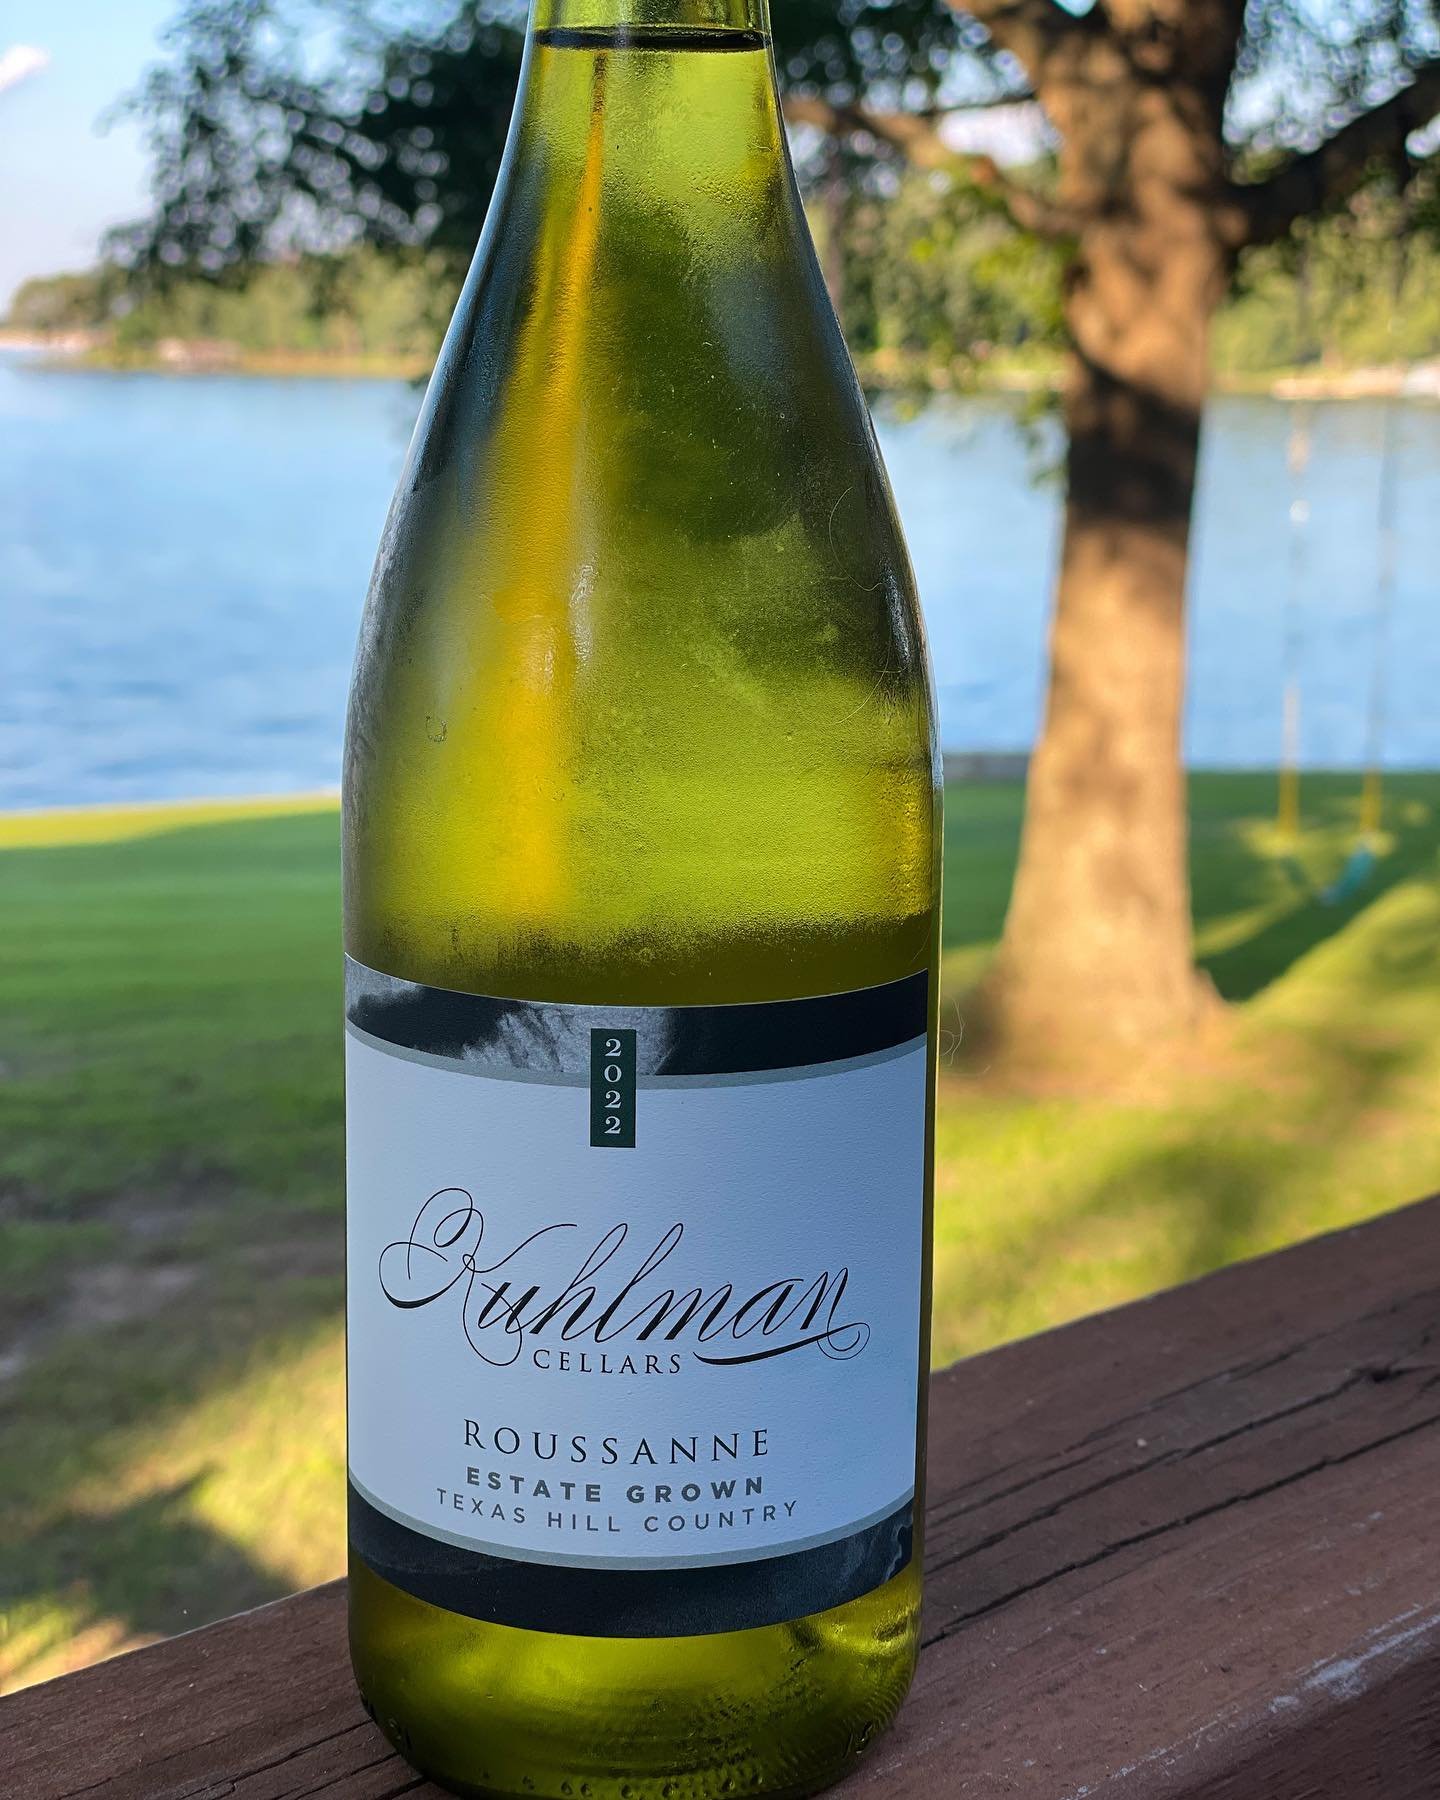 Our 2022 Estate Roussanne is 100% Estate Grown! This dry white wine has good acidic structure with notes of dried pineapple and lemon zest on the palate. It&rsquo;s the perfect summer white! 

Order some now on kuhlmancellars.com.